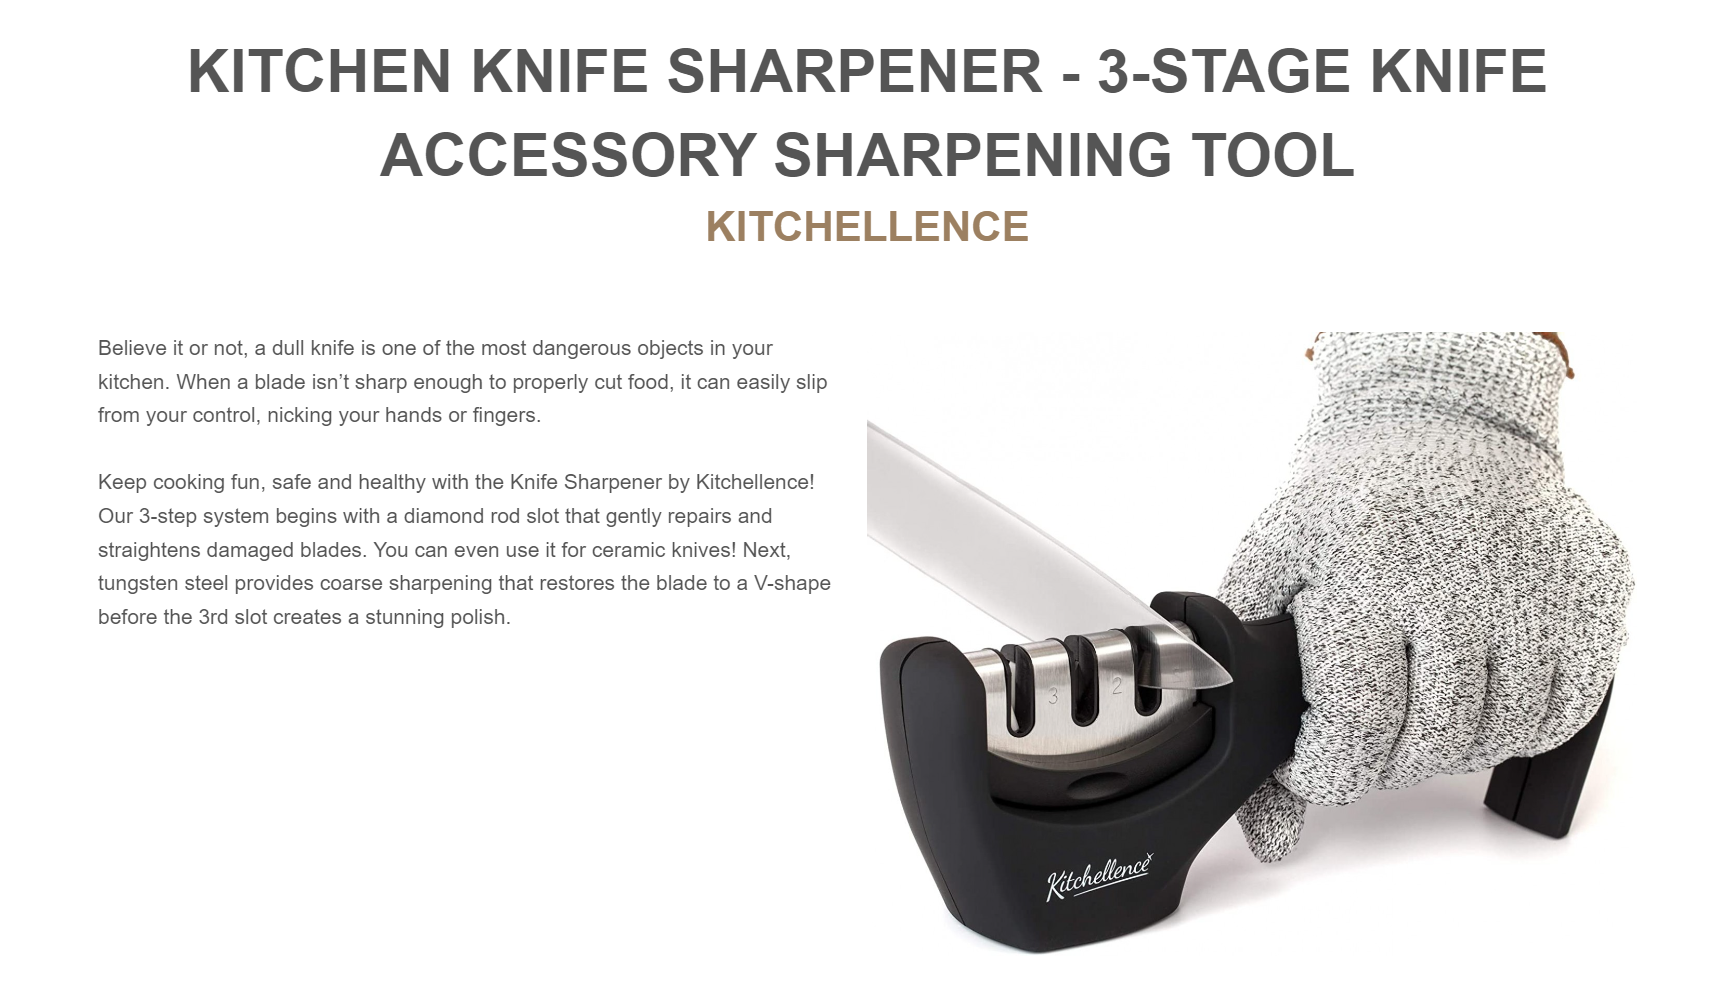 Count's Pit: Shop Kitchellence - Kitchen Knife Sharpener - 4-Slot Knife  Accessory Sharpening Tool in the Philippines